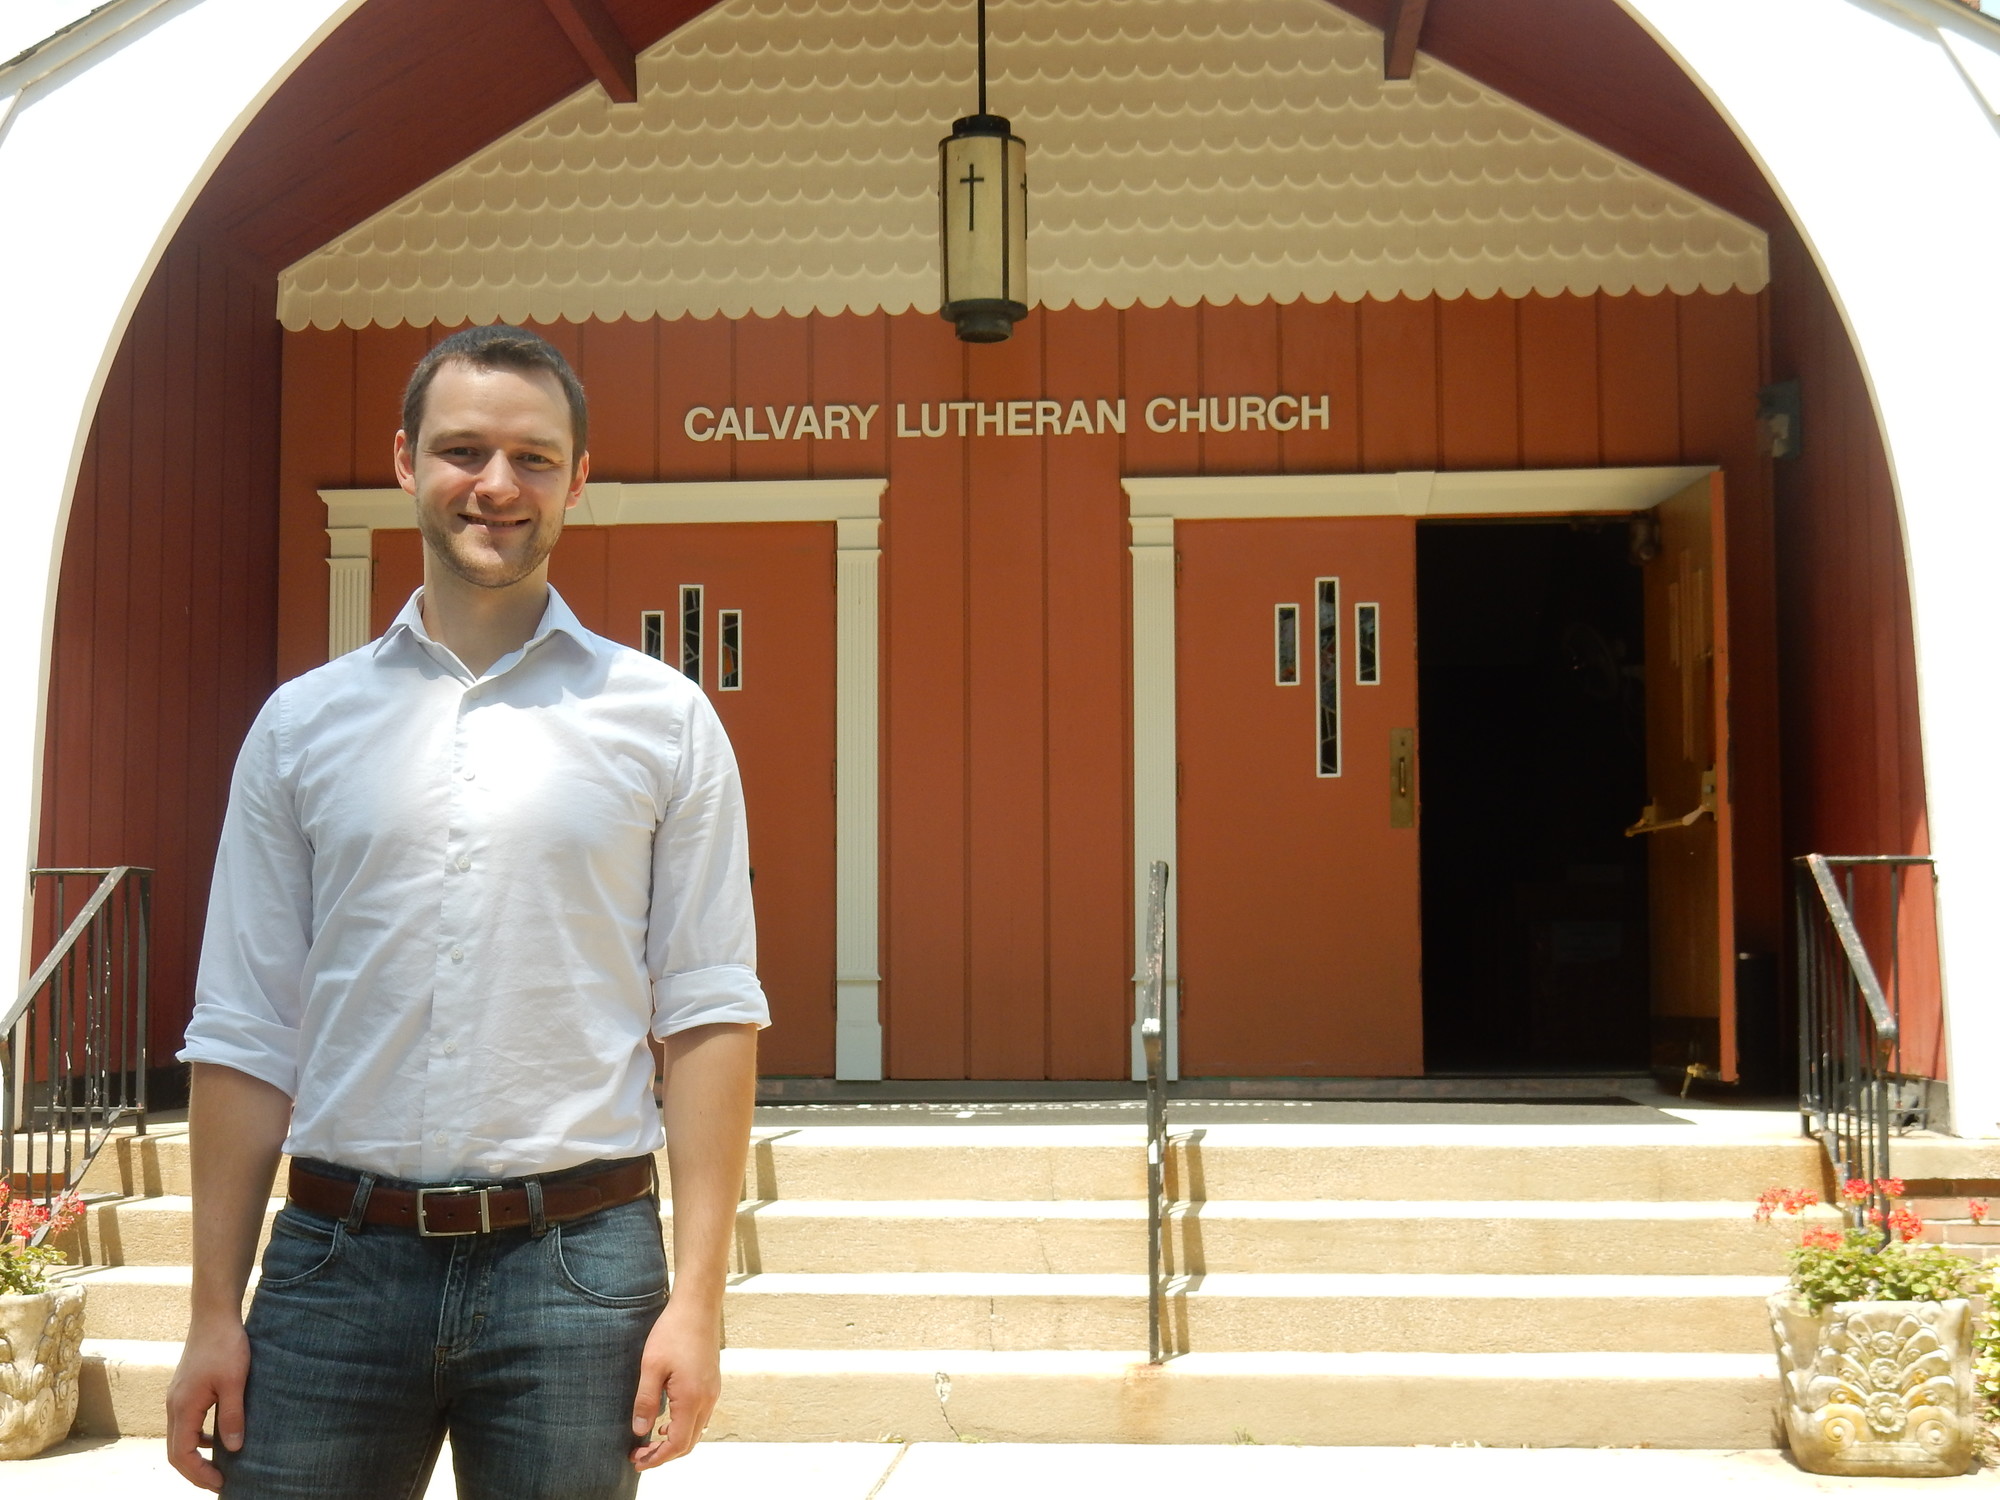 At 25, Mark Budenholzer said he is eager to lead Calvary Lutheran Church, on Taylor Avenue,  which has its lowest membership in decades.